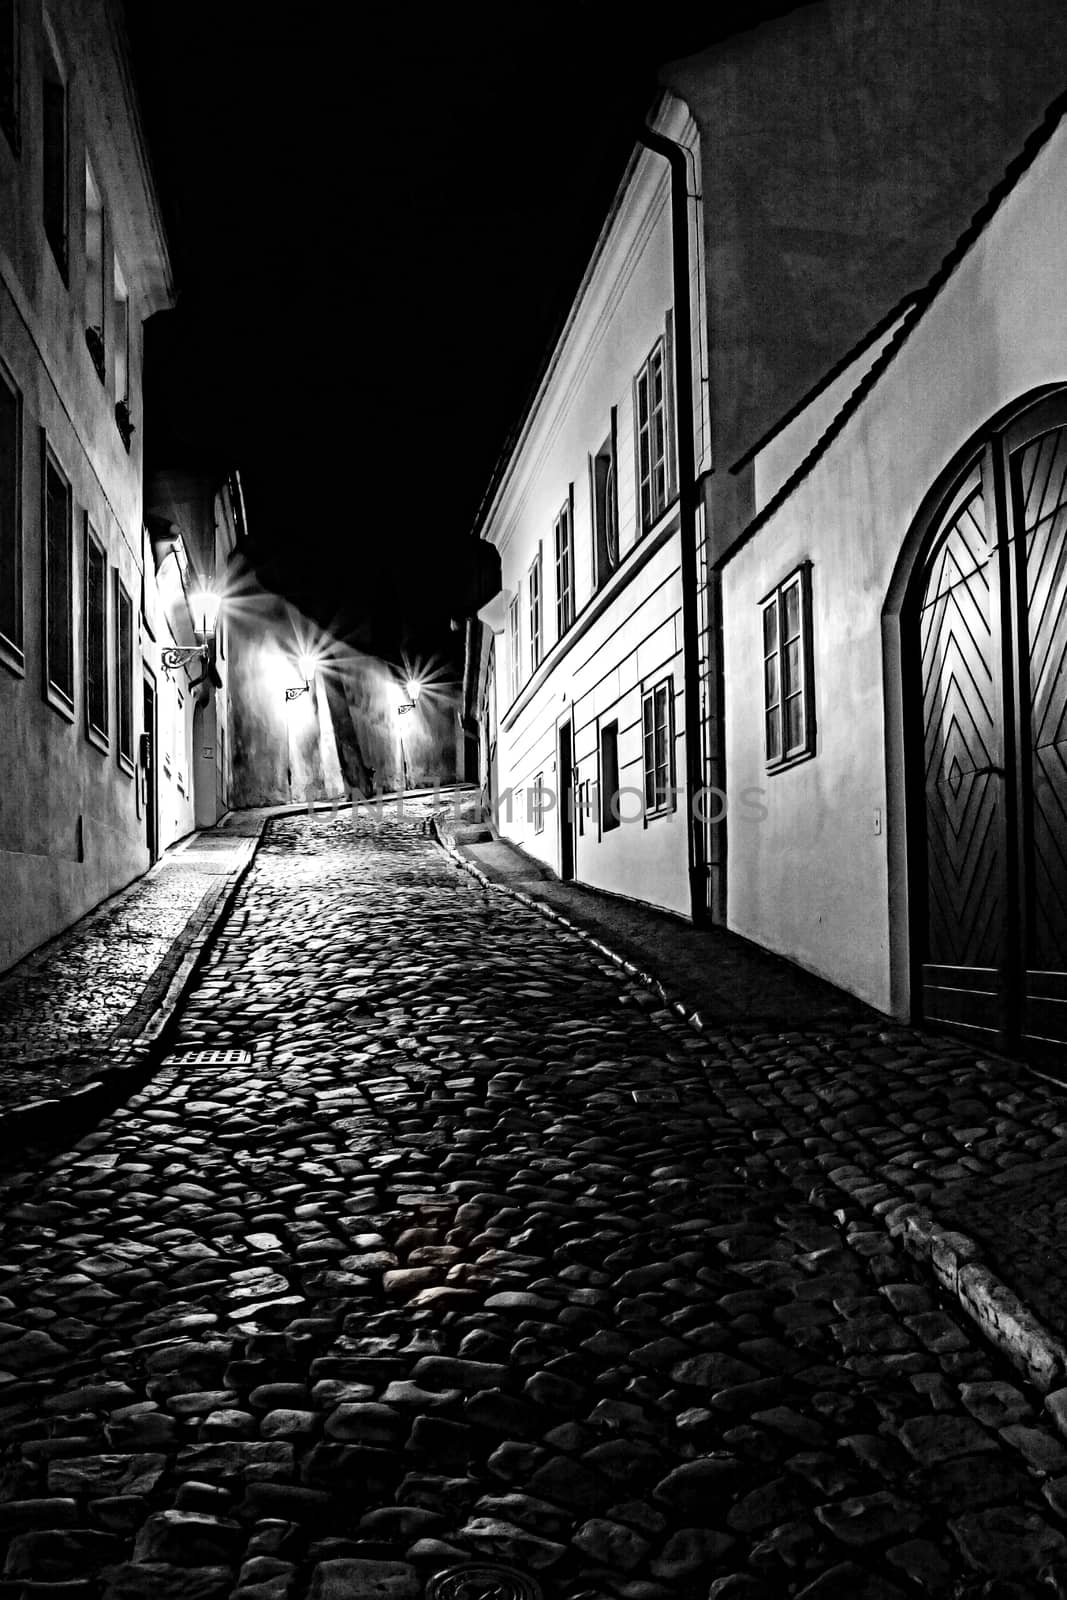 mysterious narrow alley with lanterns in Prague at night

